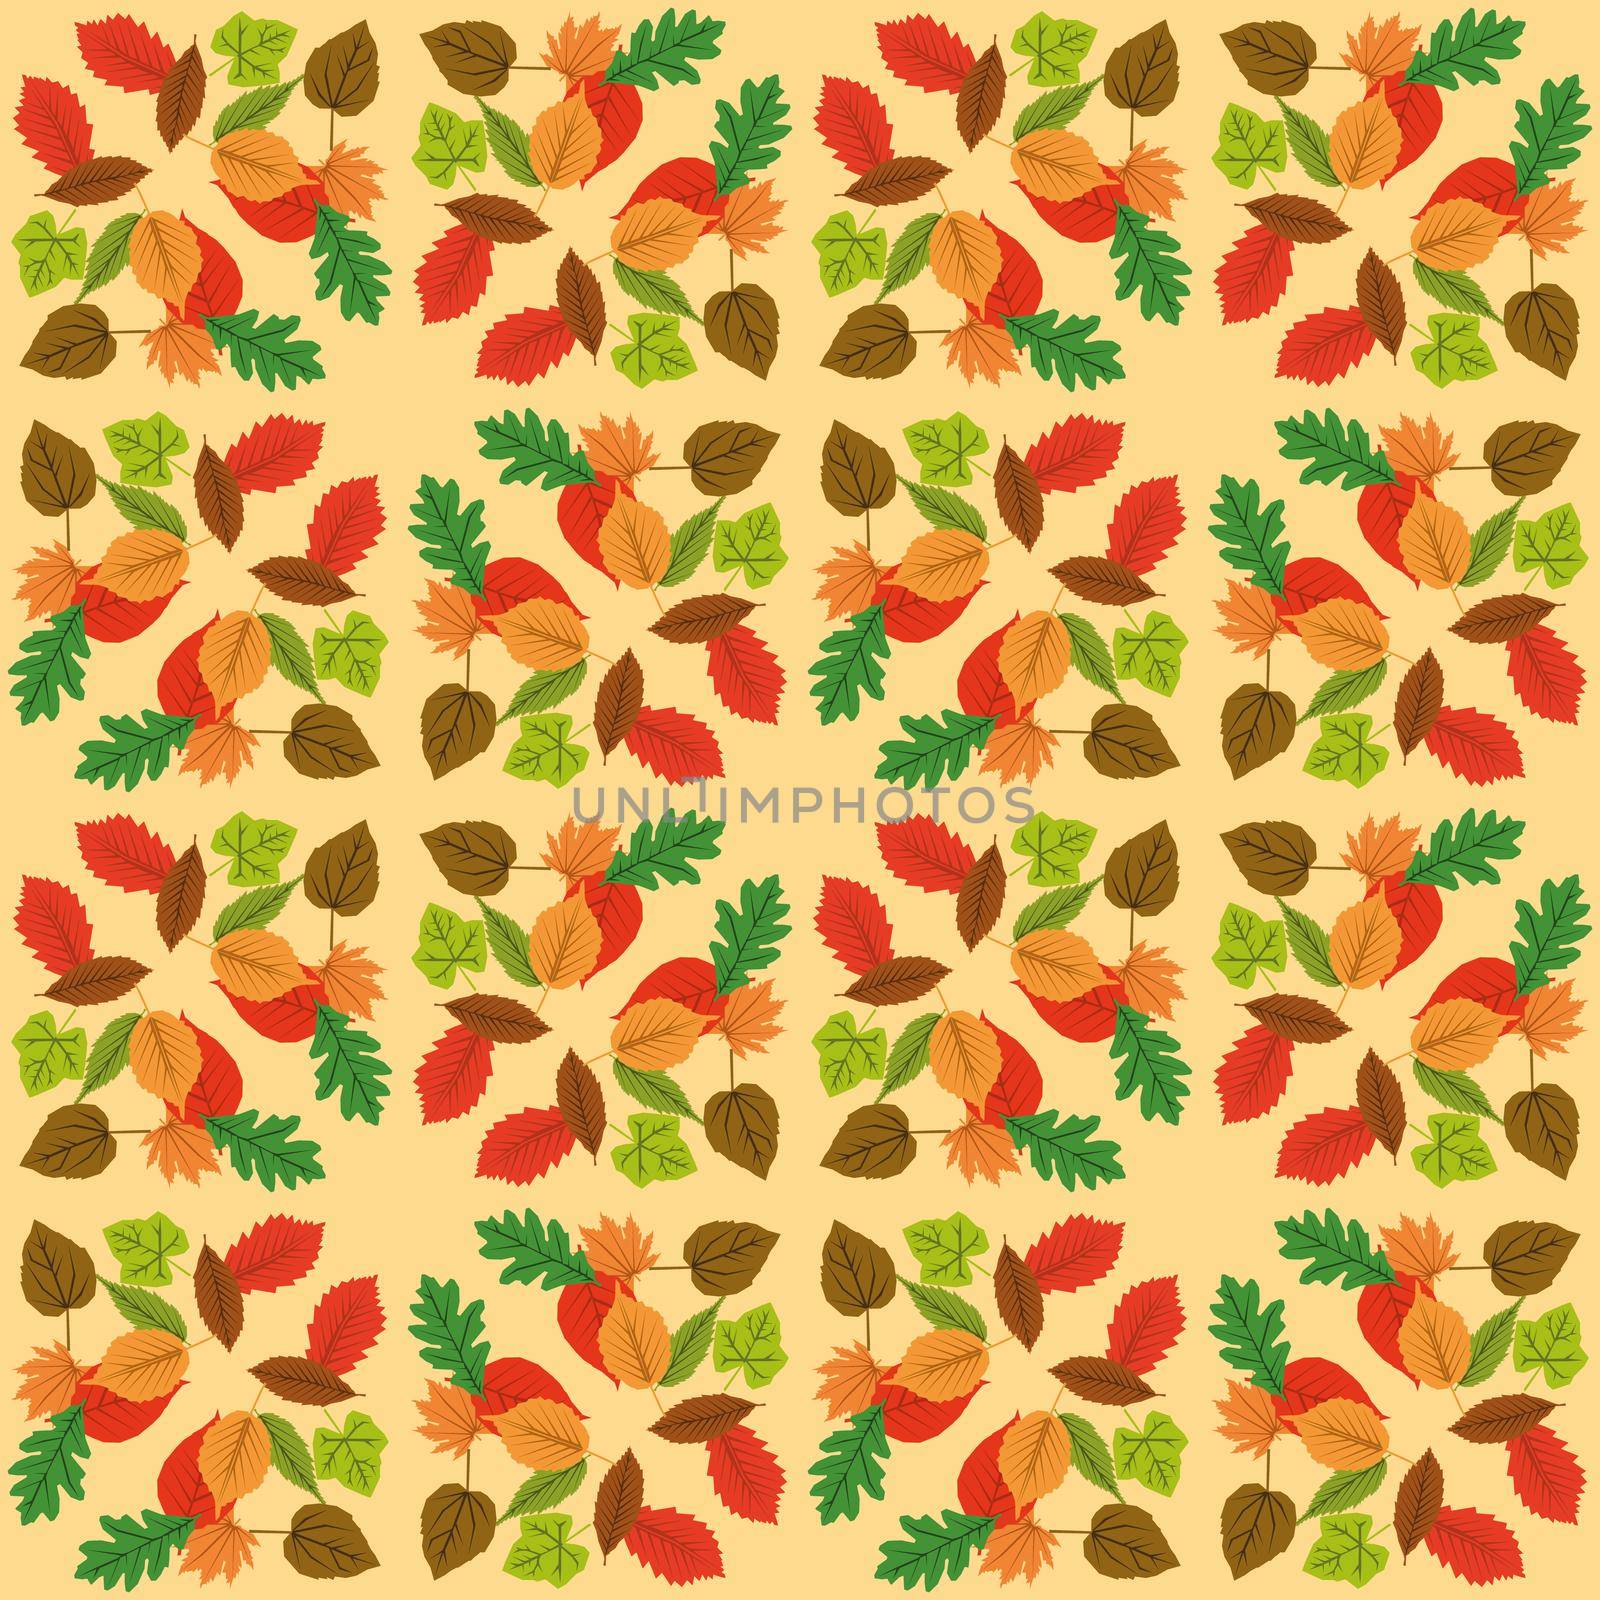 Autumn leaf design over white yellow background by Alxyzt